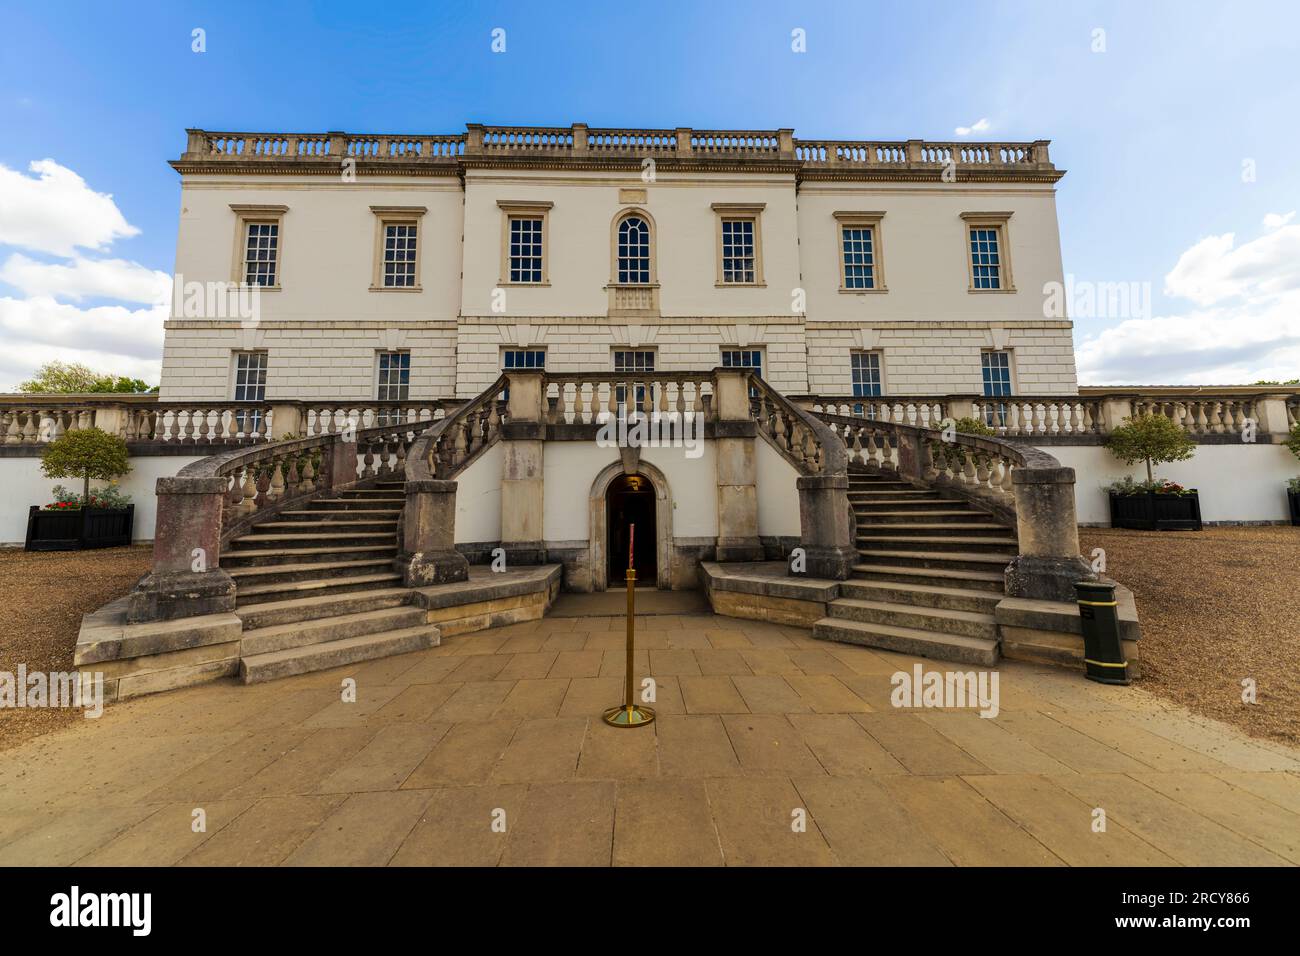 Queen's House in Greenwich, London. A former royal residence, now an art gallery. The art museum is housed inside the first Classical building in UK. Stock Photo